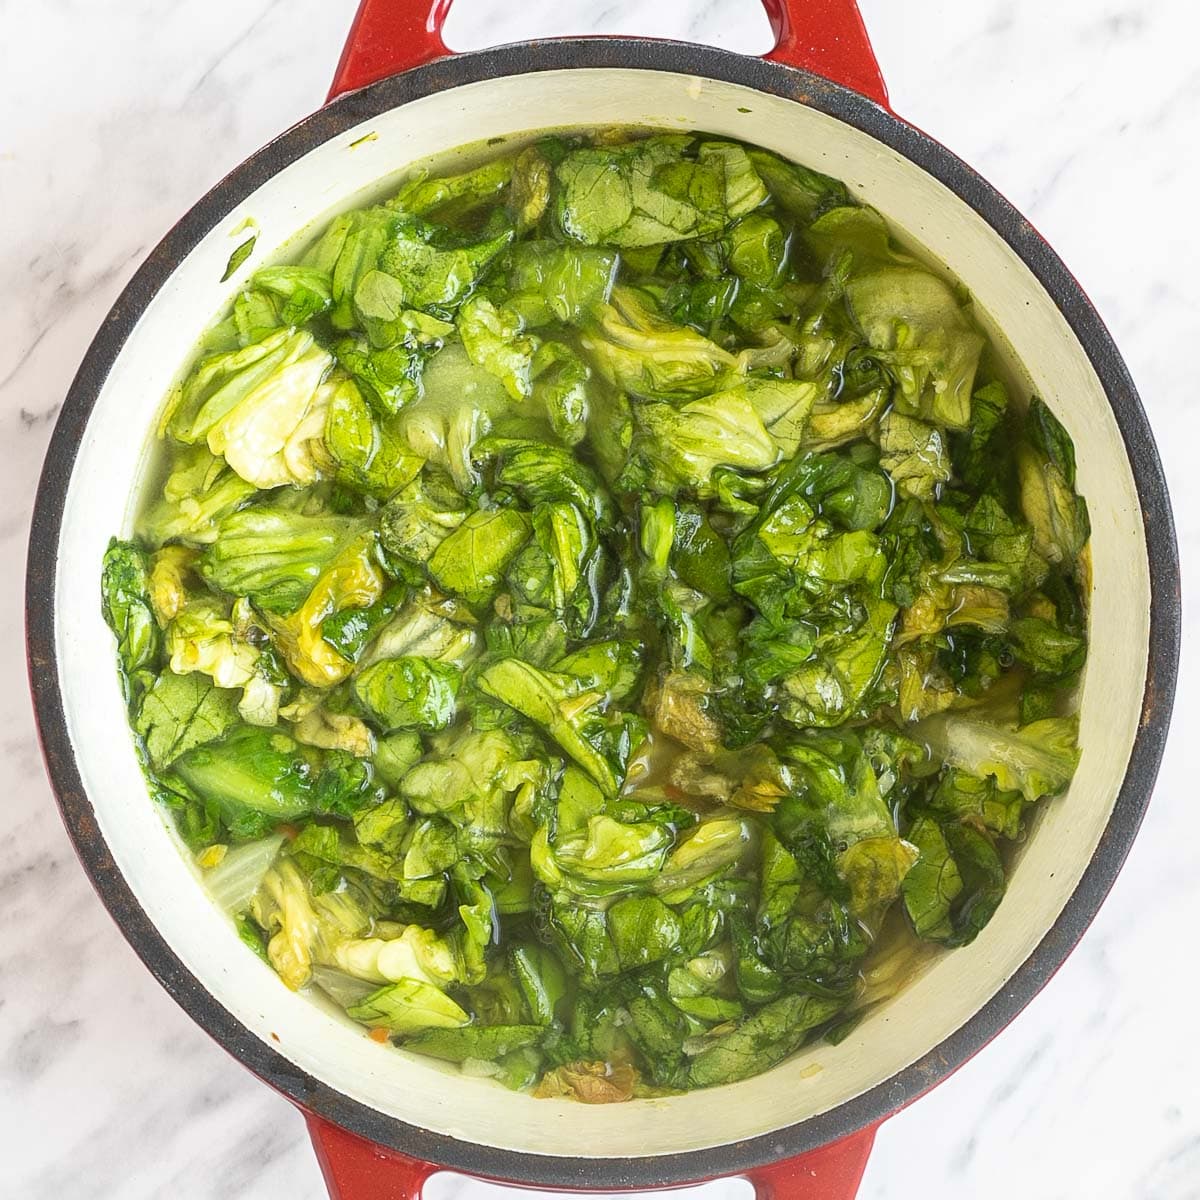 A red white enameled Dutch oven with chopped wilted green escarole in a thin soup.